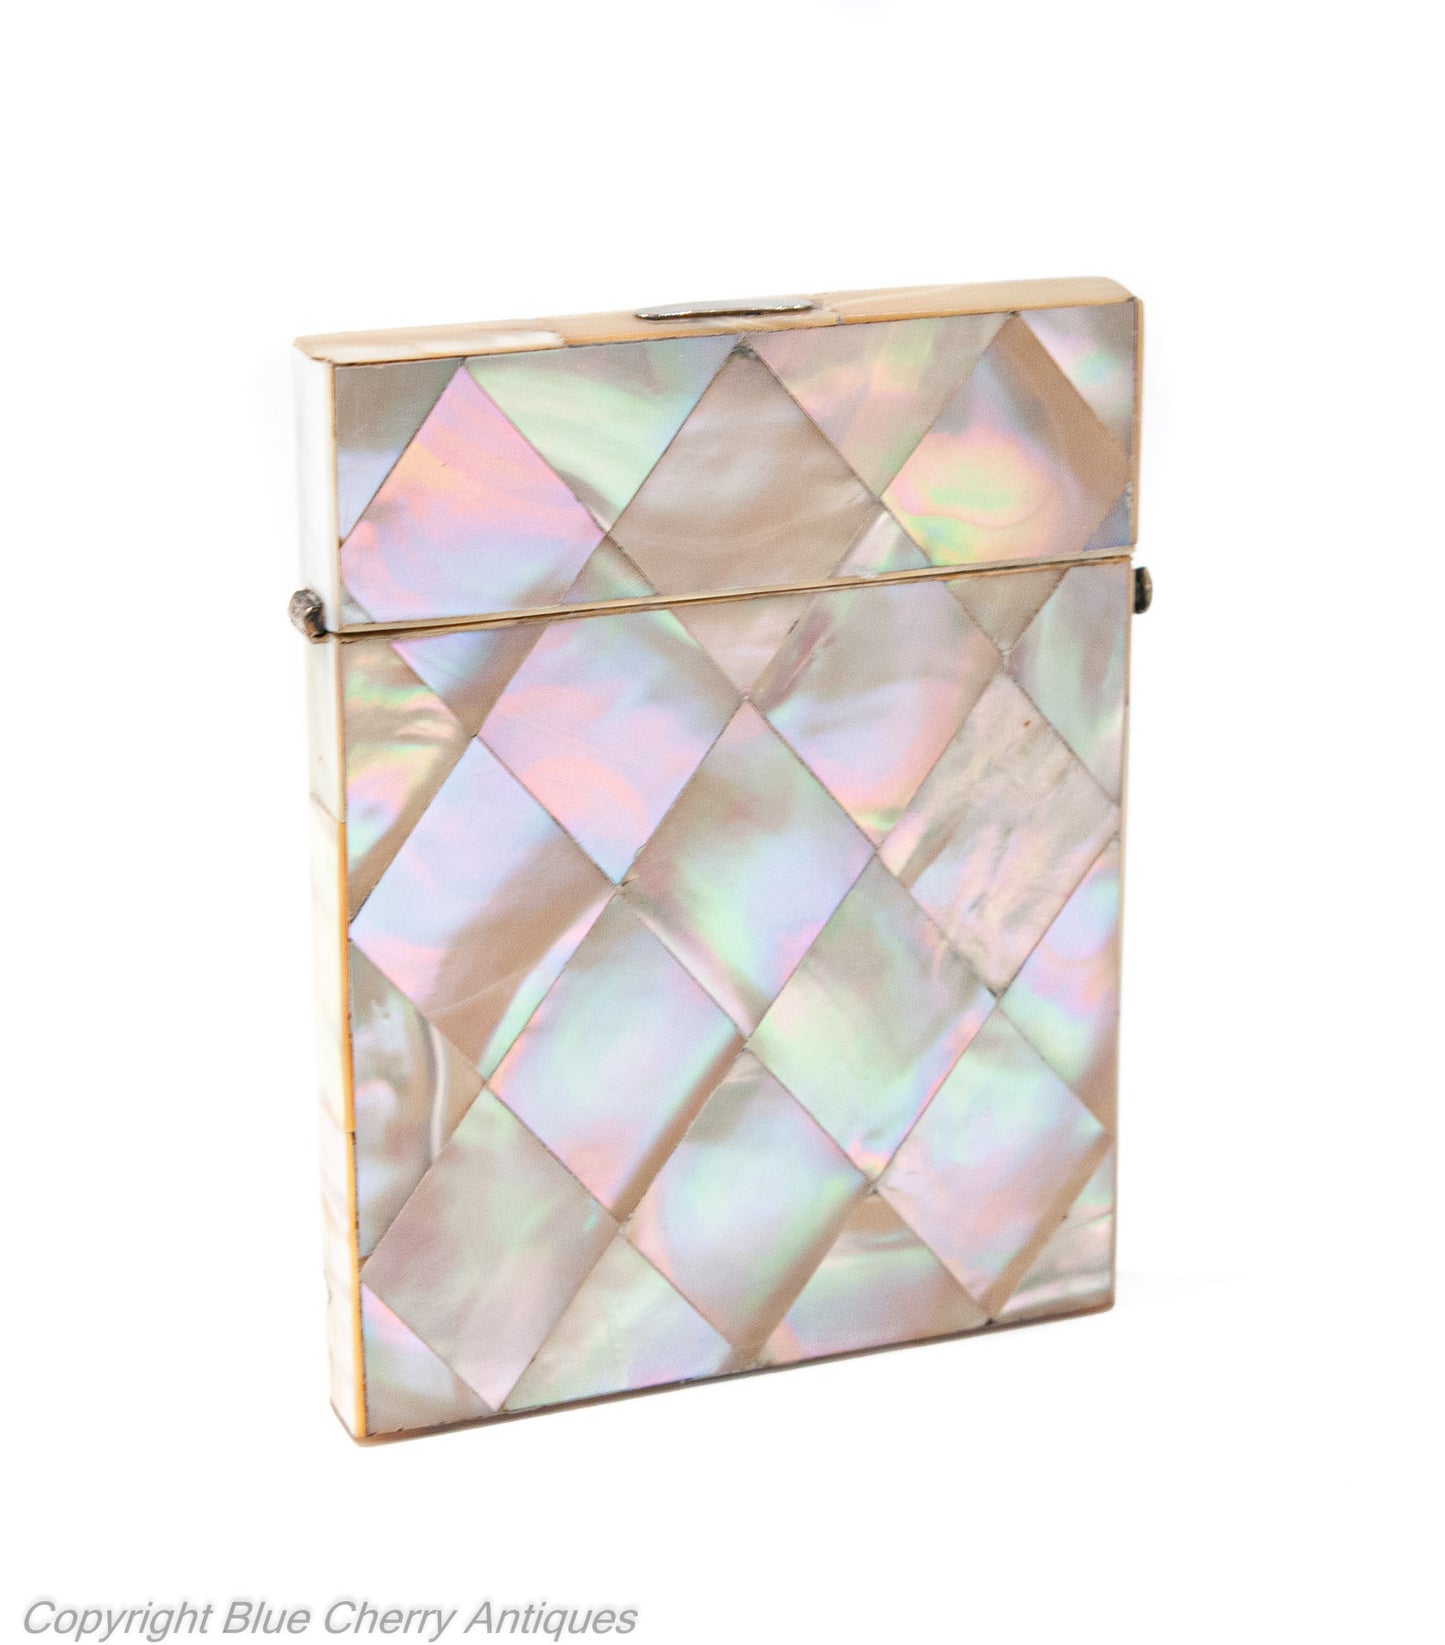 Antique Victorian Diamond Panel Iridescent Mother of Pearl Calling Card Case (Code 1925)